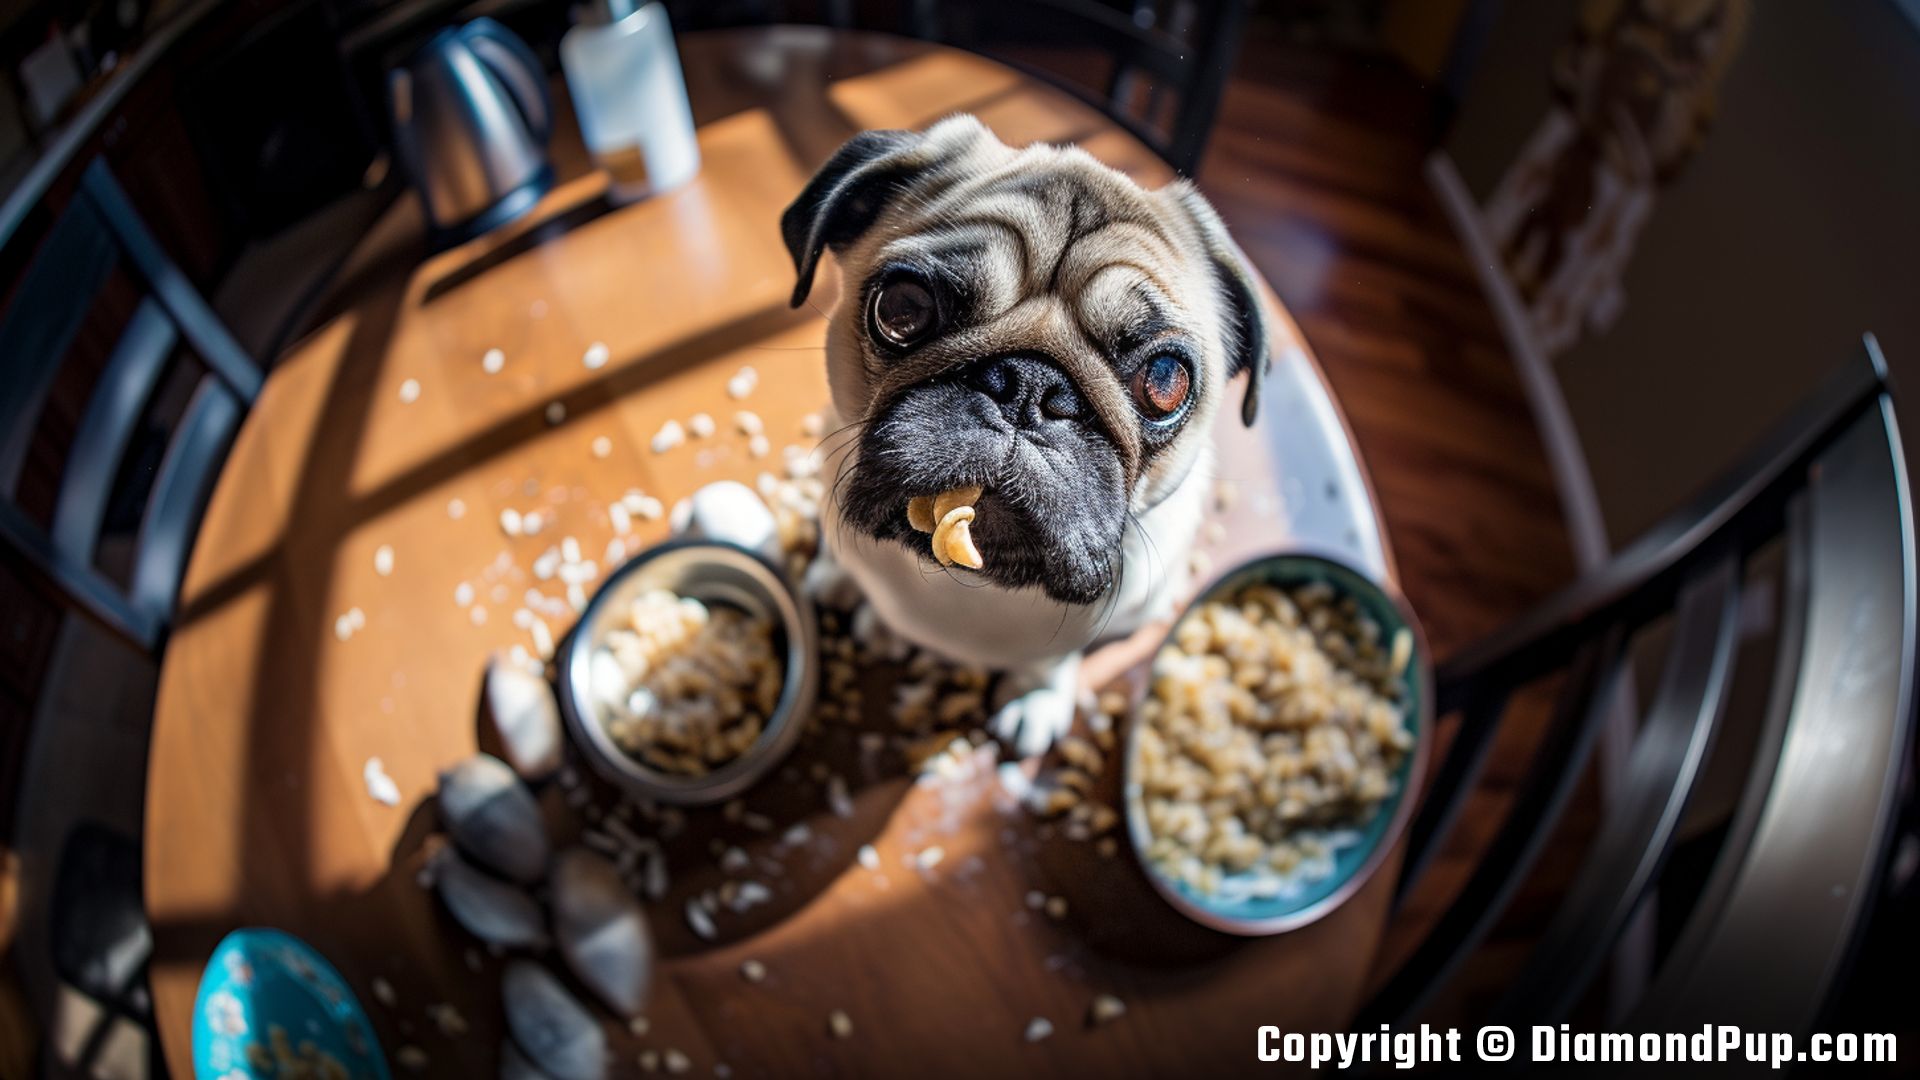 Photograph of a Playful Pug Snacking on Pasta